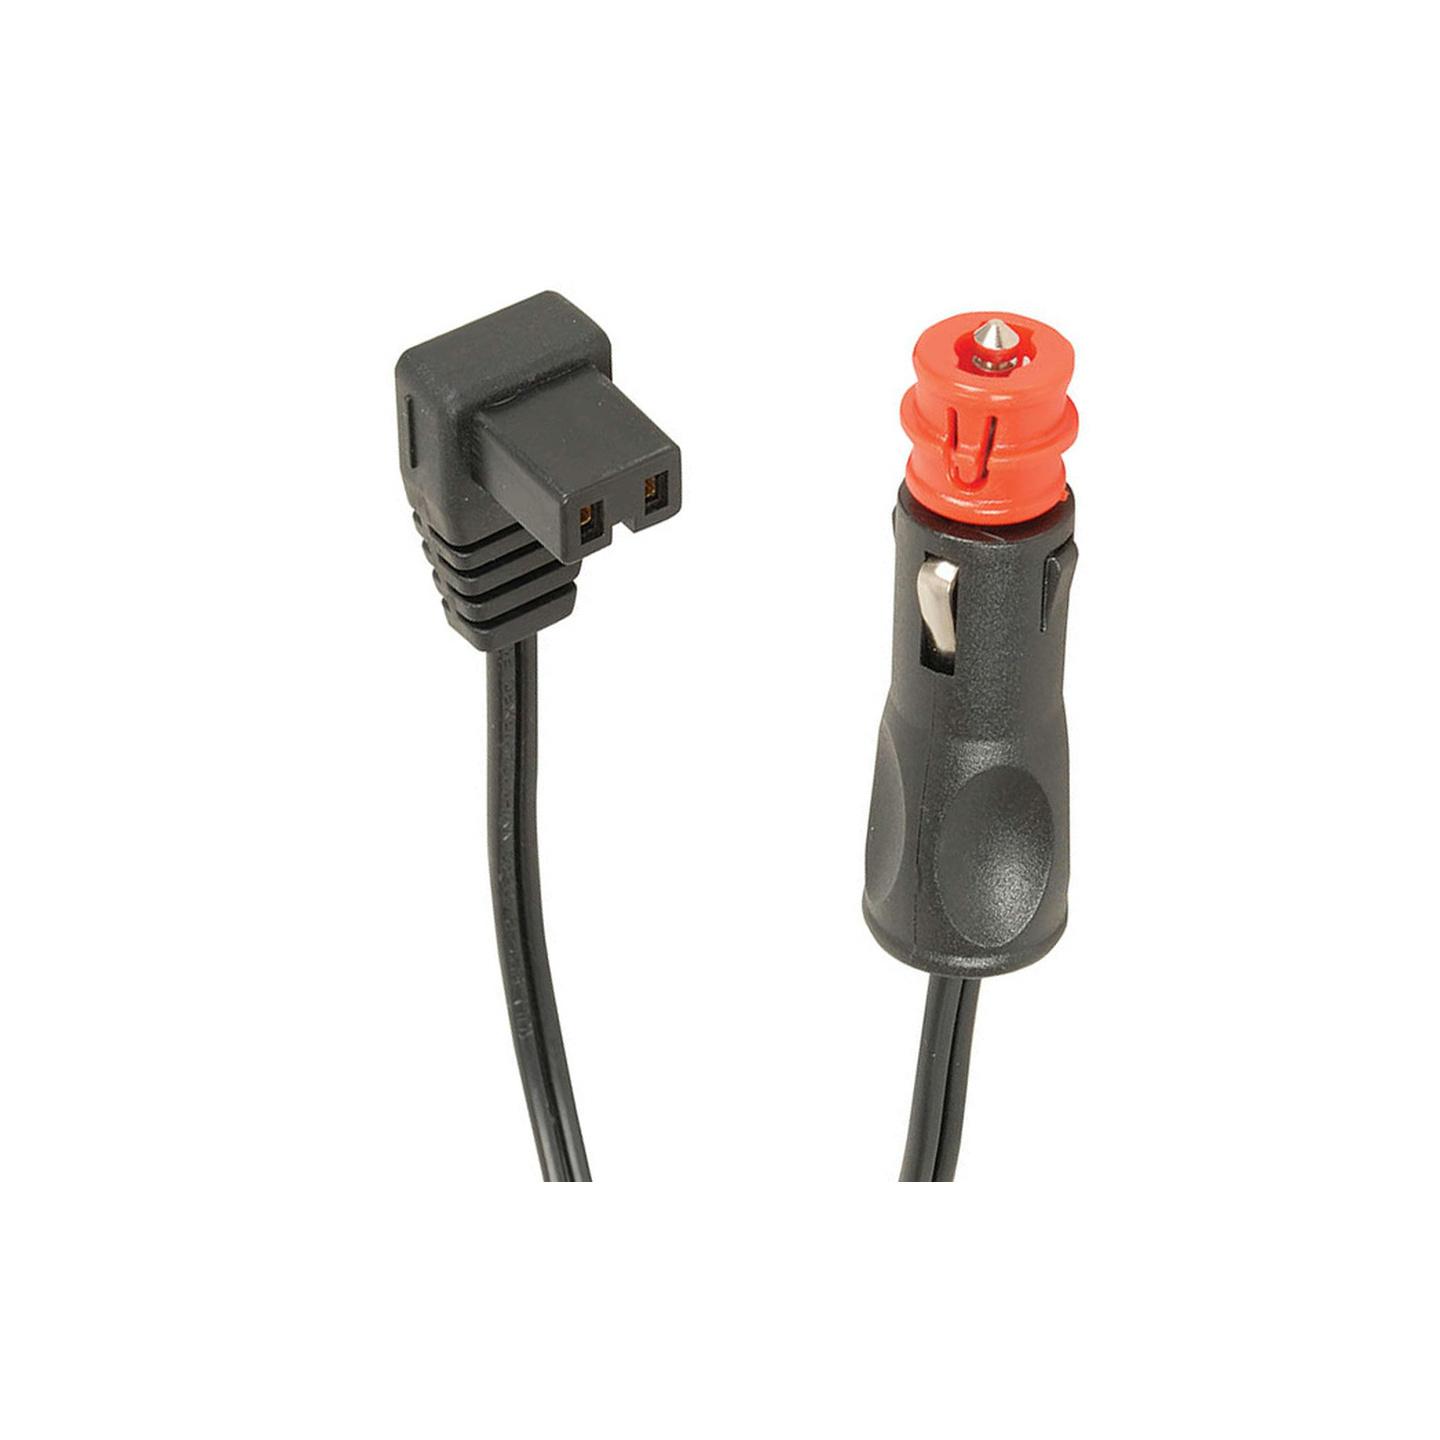 12/24V Power Cable for Brass Monkey and Waeco Fridges